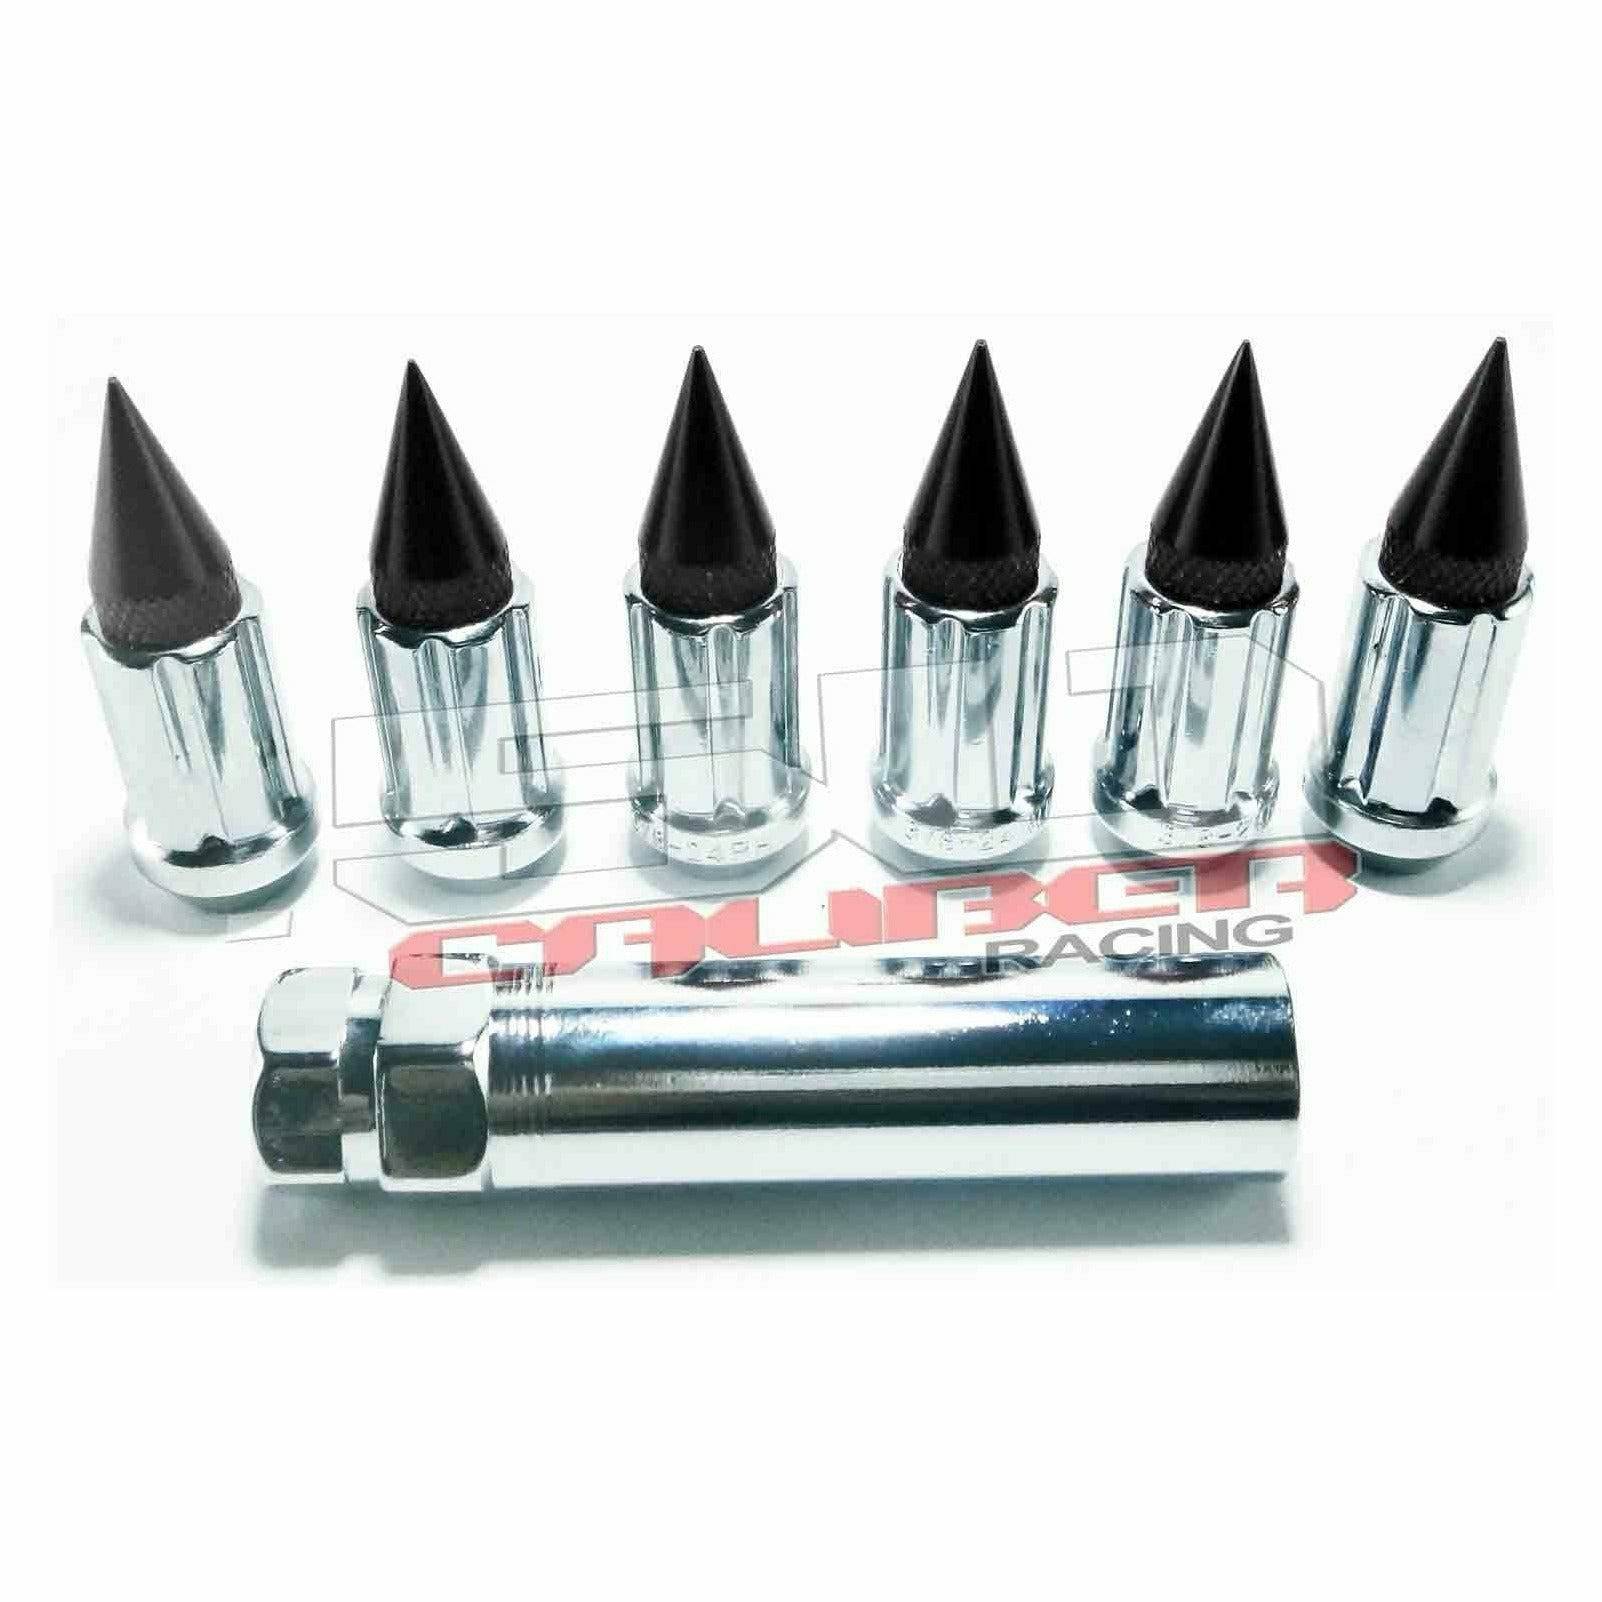 50 Caliber Racing 12 x 1.25 mm Spiked Lug Nuts (16 Pack)